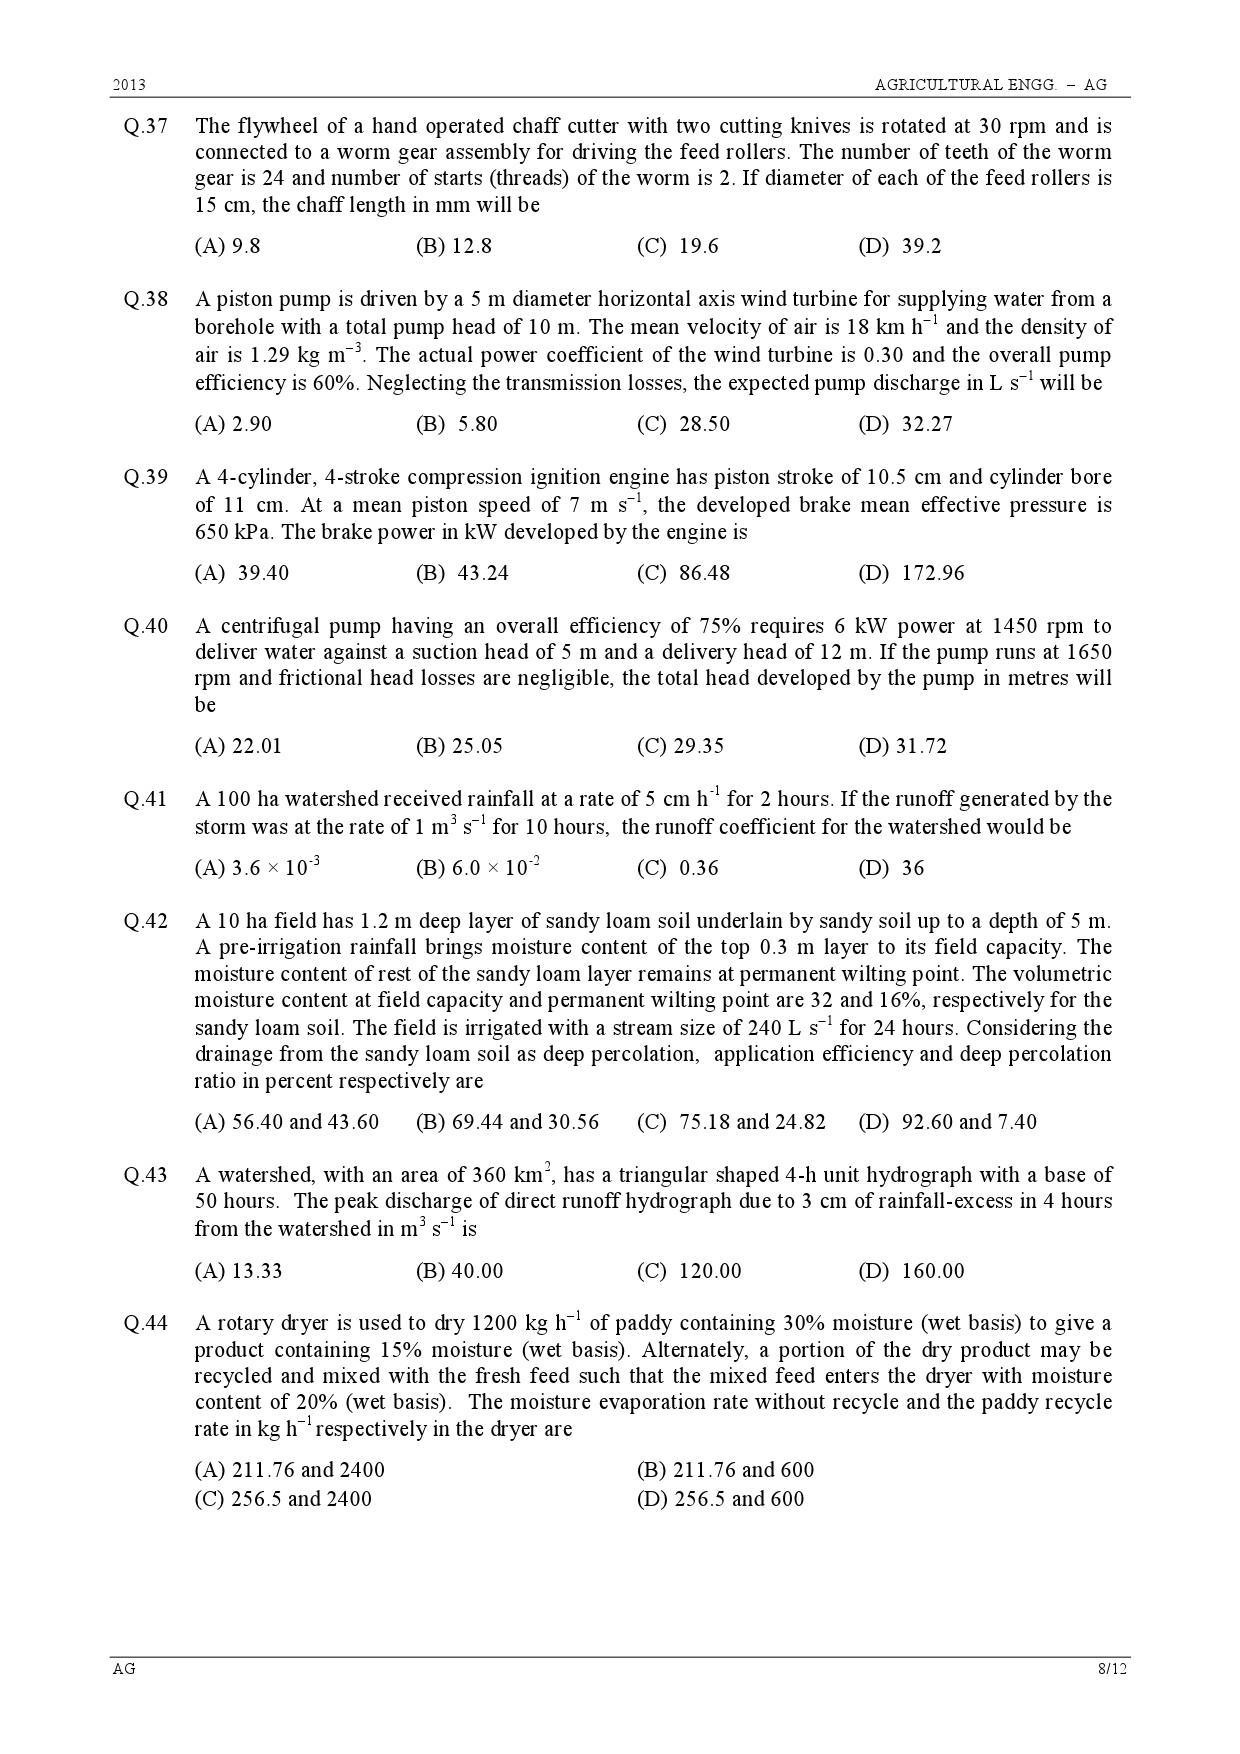 GATE Exam Question Paper 2013 Agricultural Engineering 8